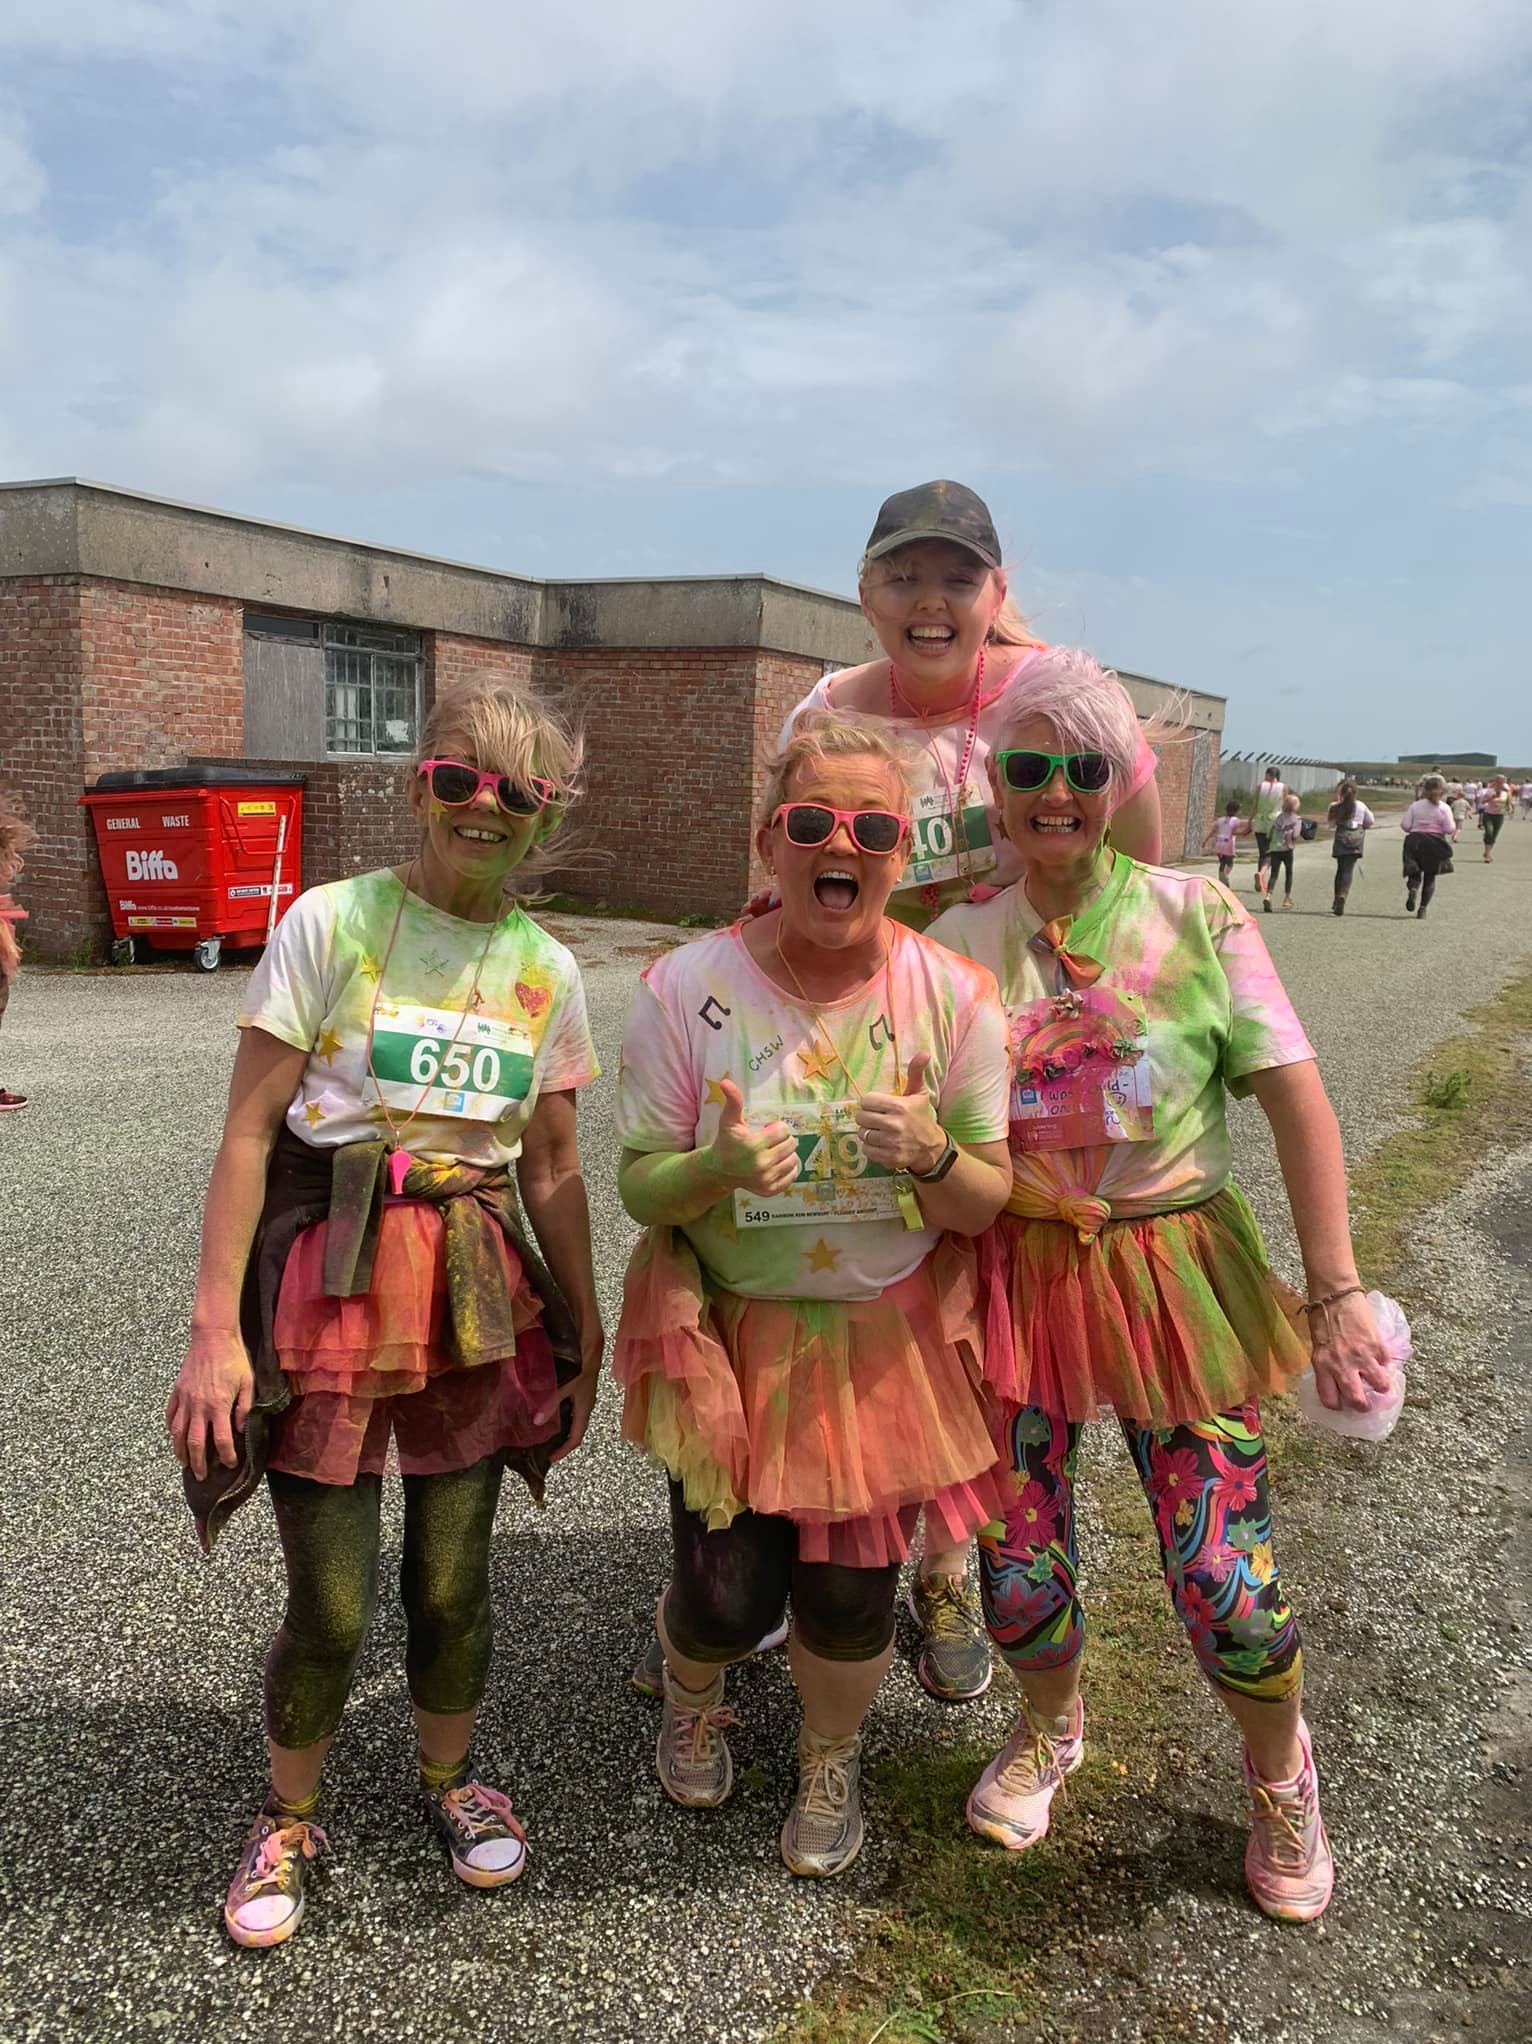 Tracey (middle) also took part in the Rainbow Race for charity last weekend